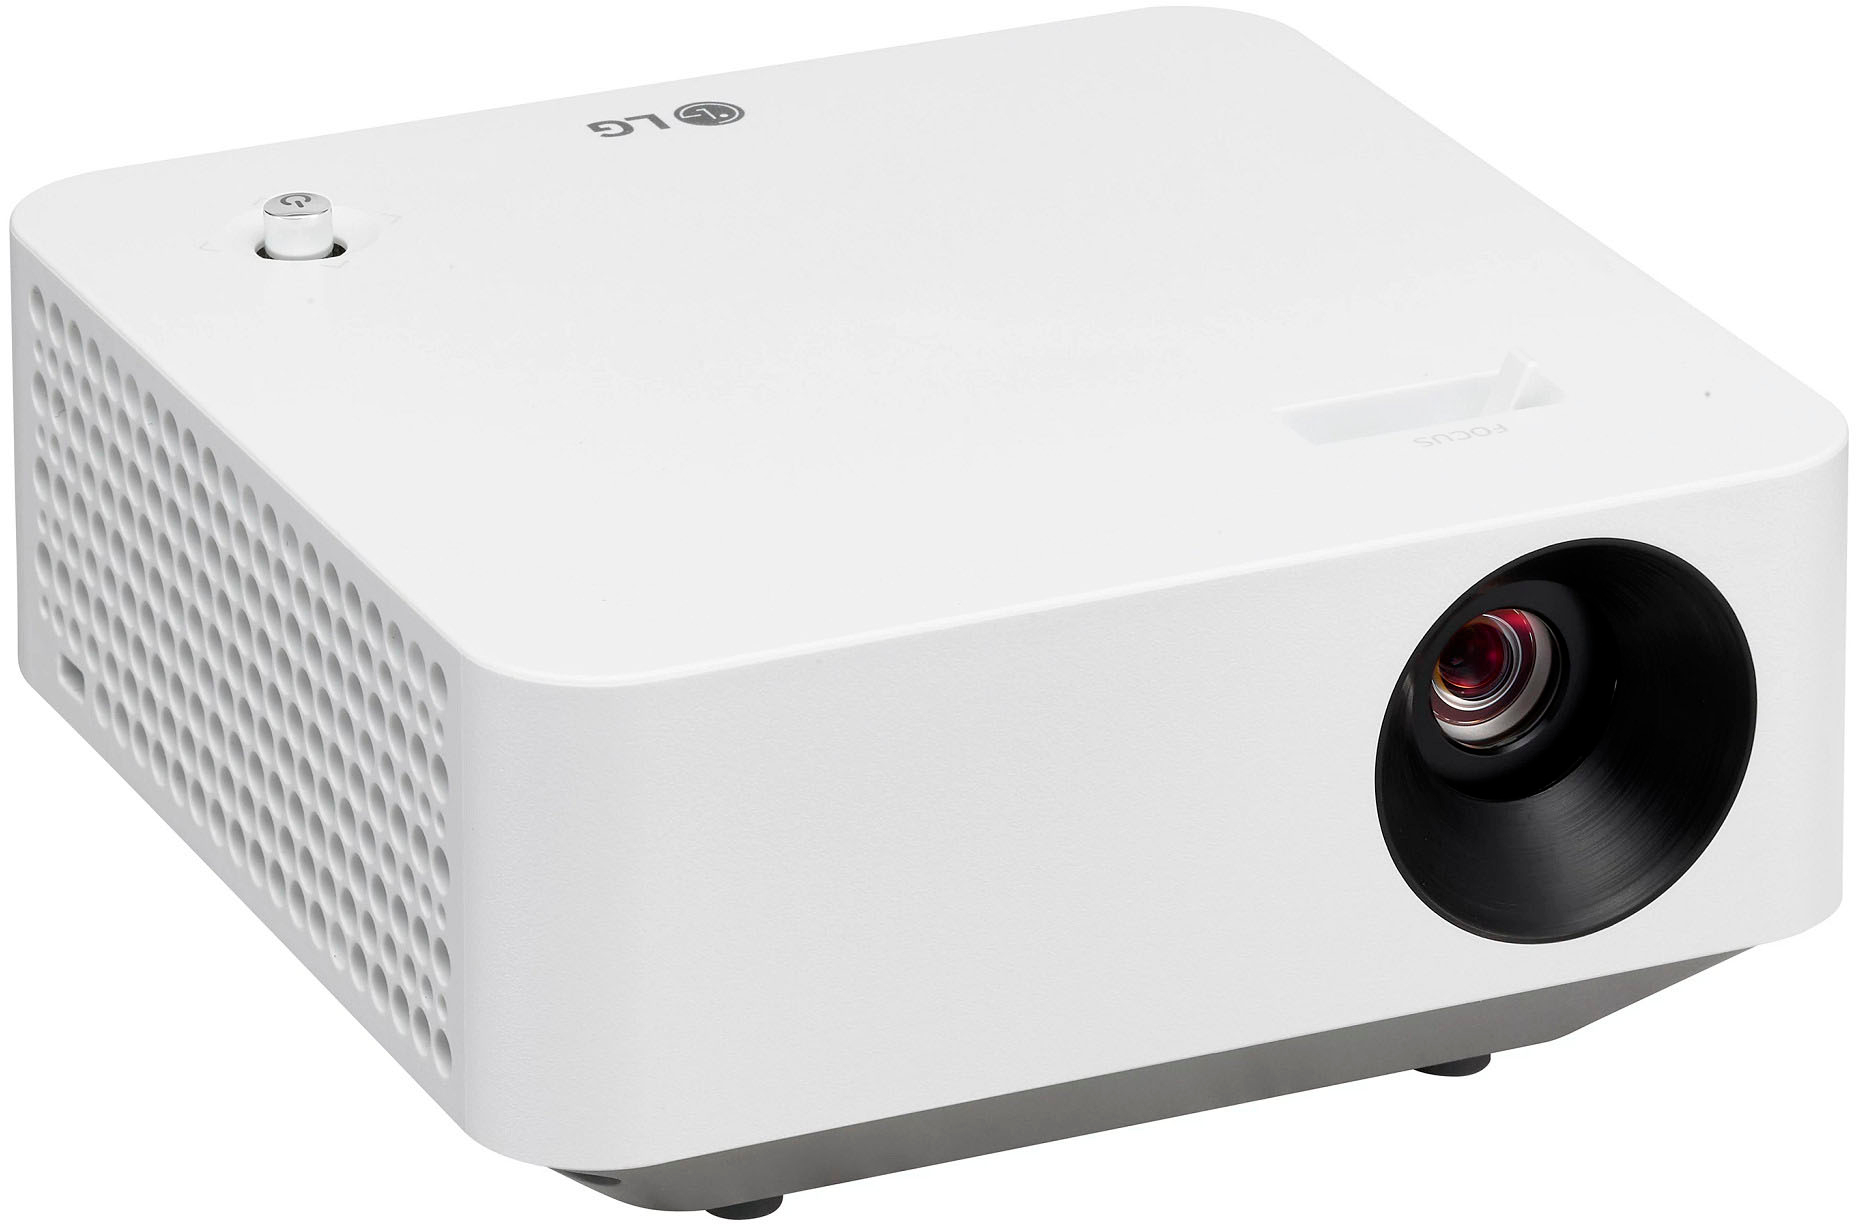 Angle View: Kodak - FLIK X10 Full HD Home Projector, 1080p Portable Projector & Home Theater System with Remote Control - White